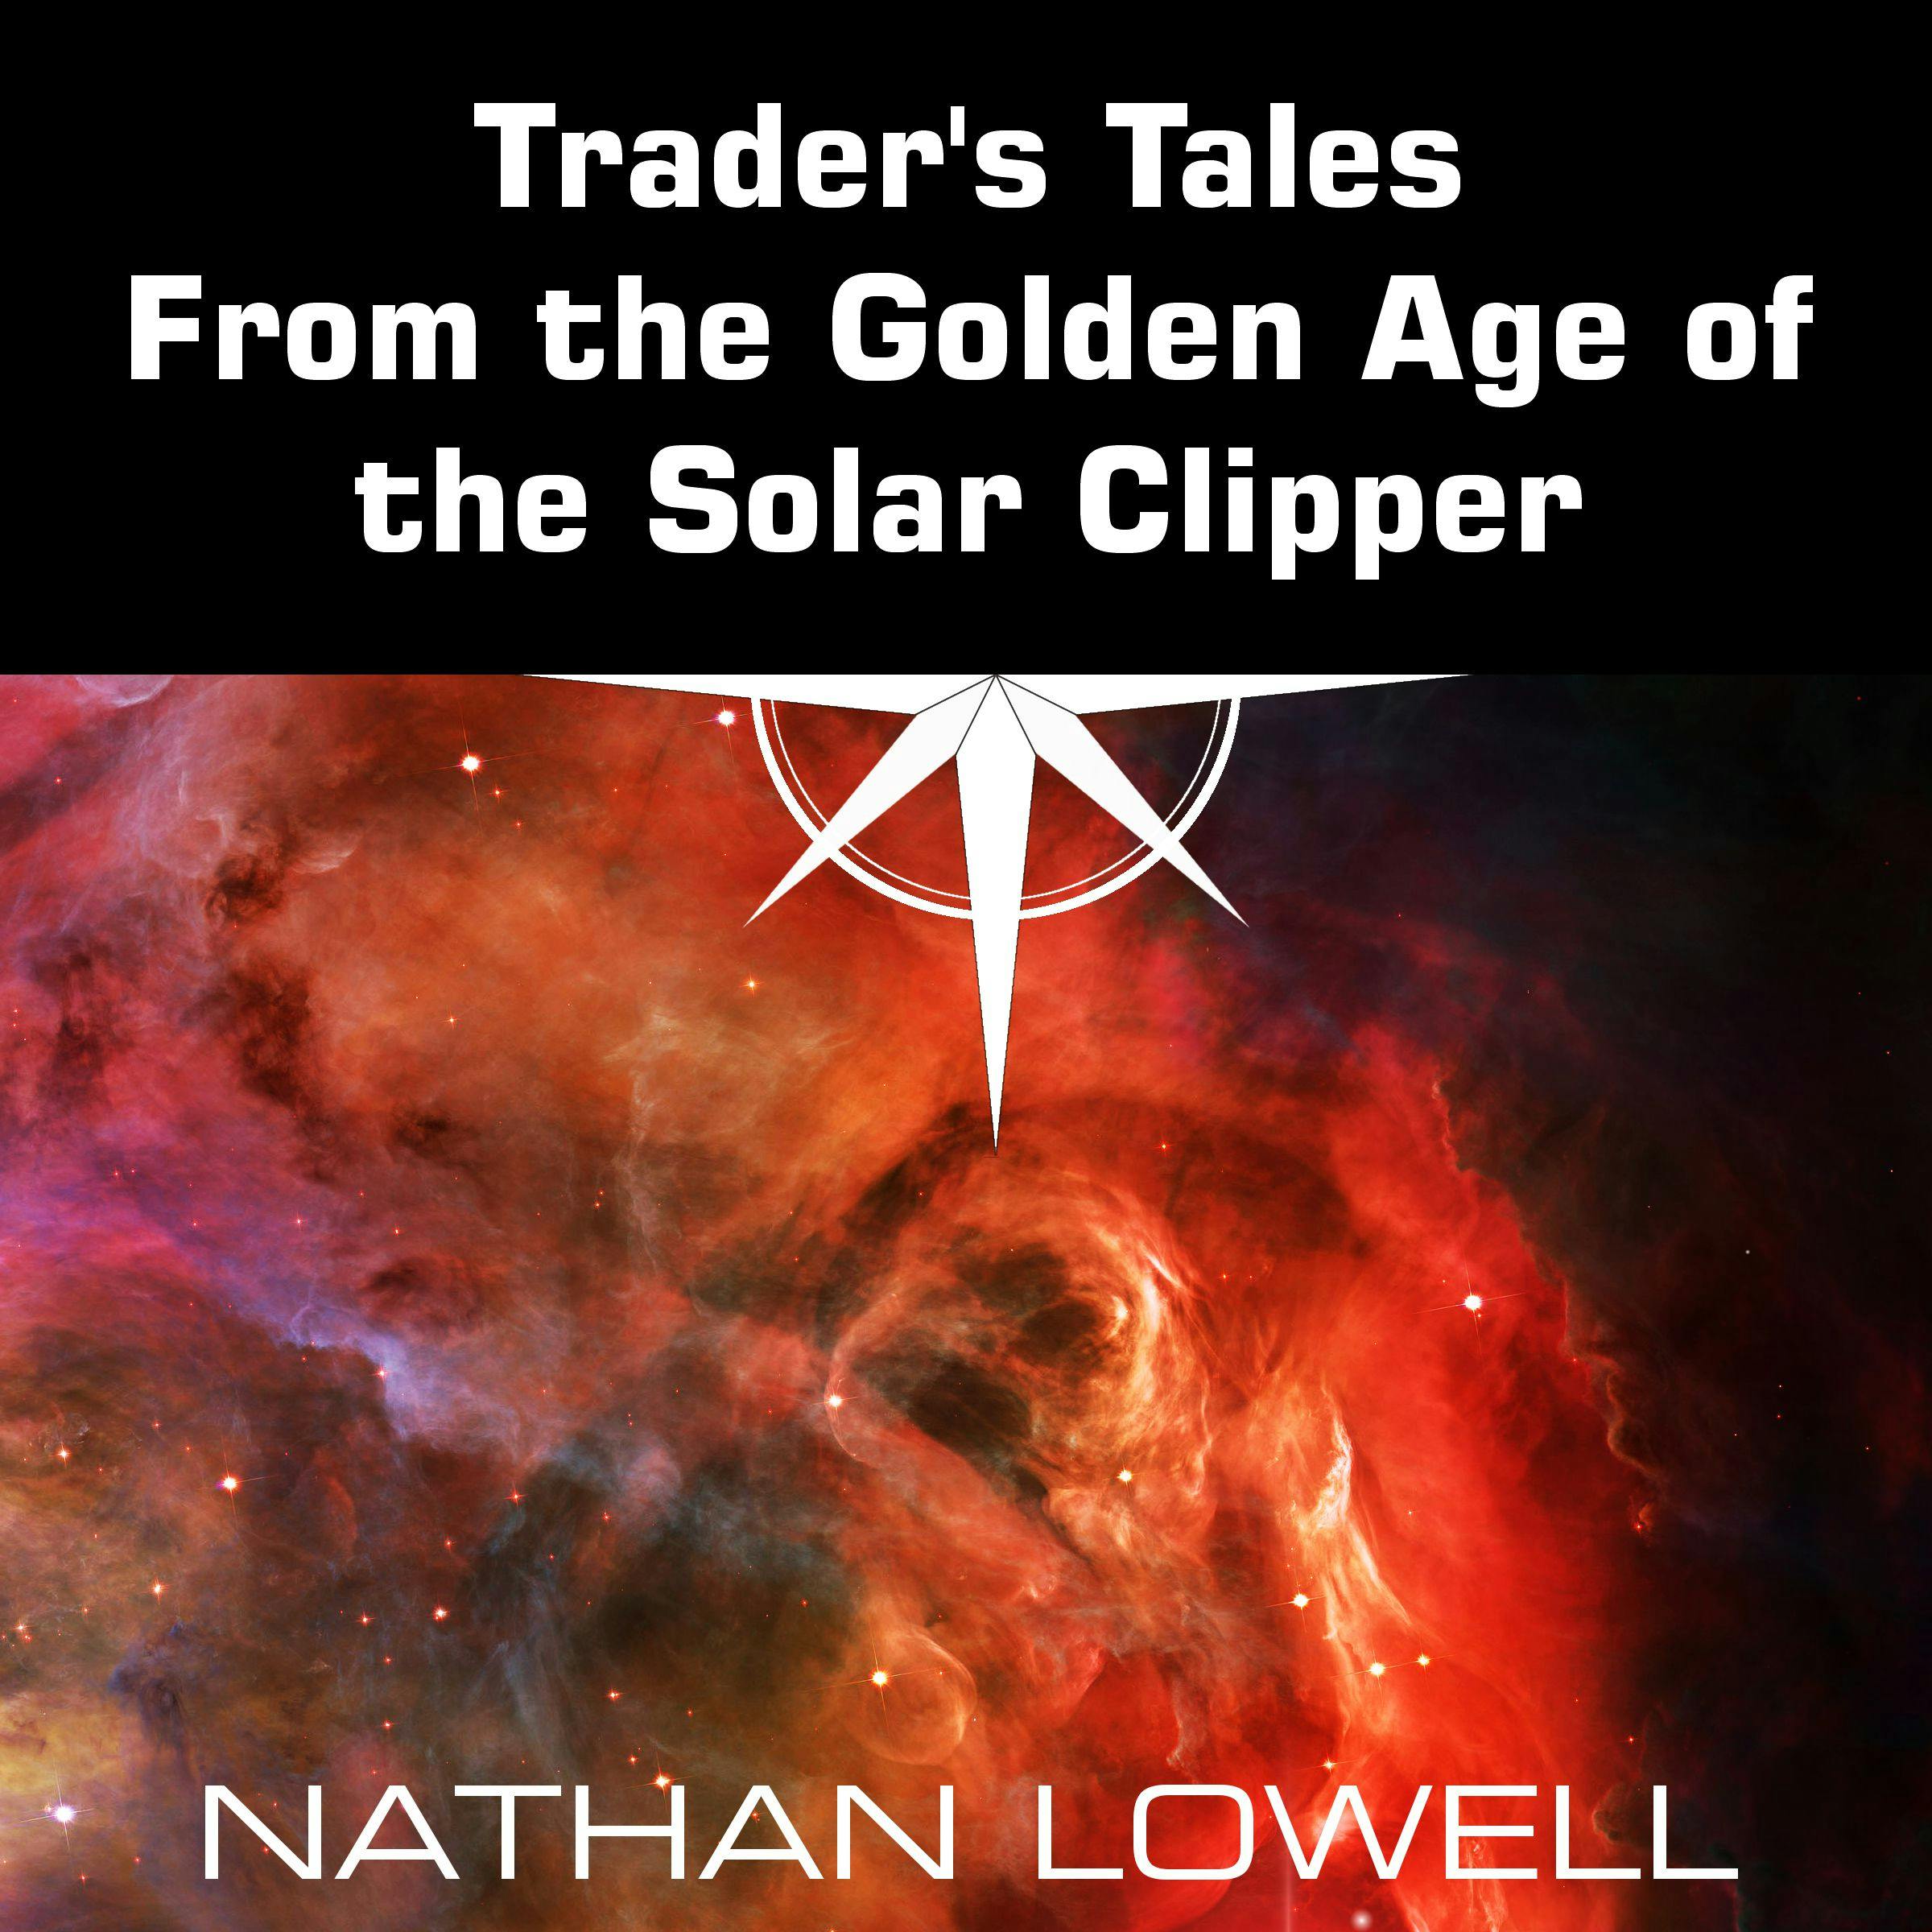 Trader's Tales From the Golden Age of the Solar Clipper:Nathan Lowell | Scribl